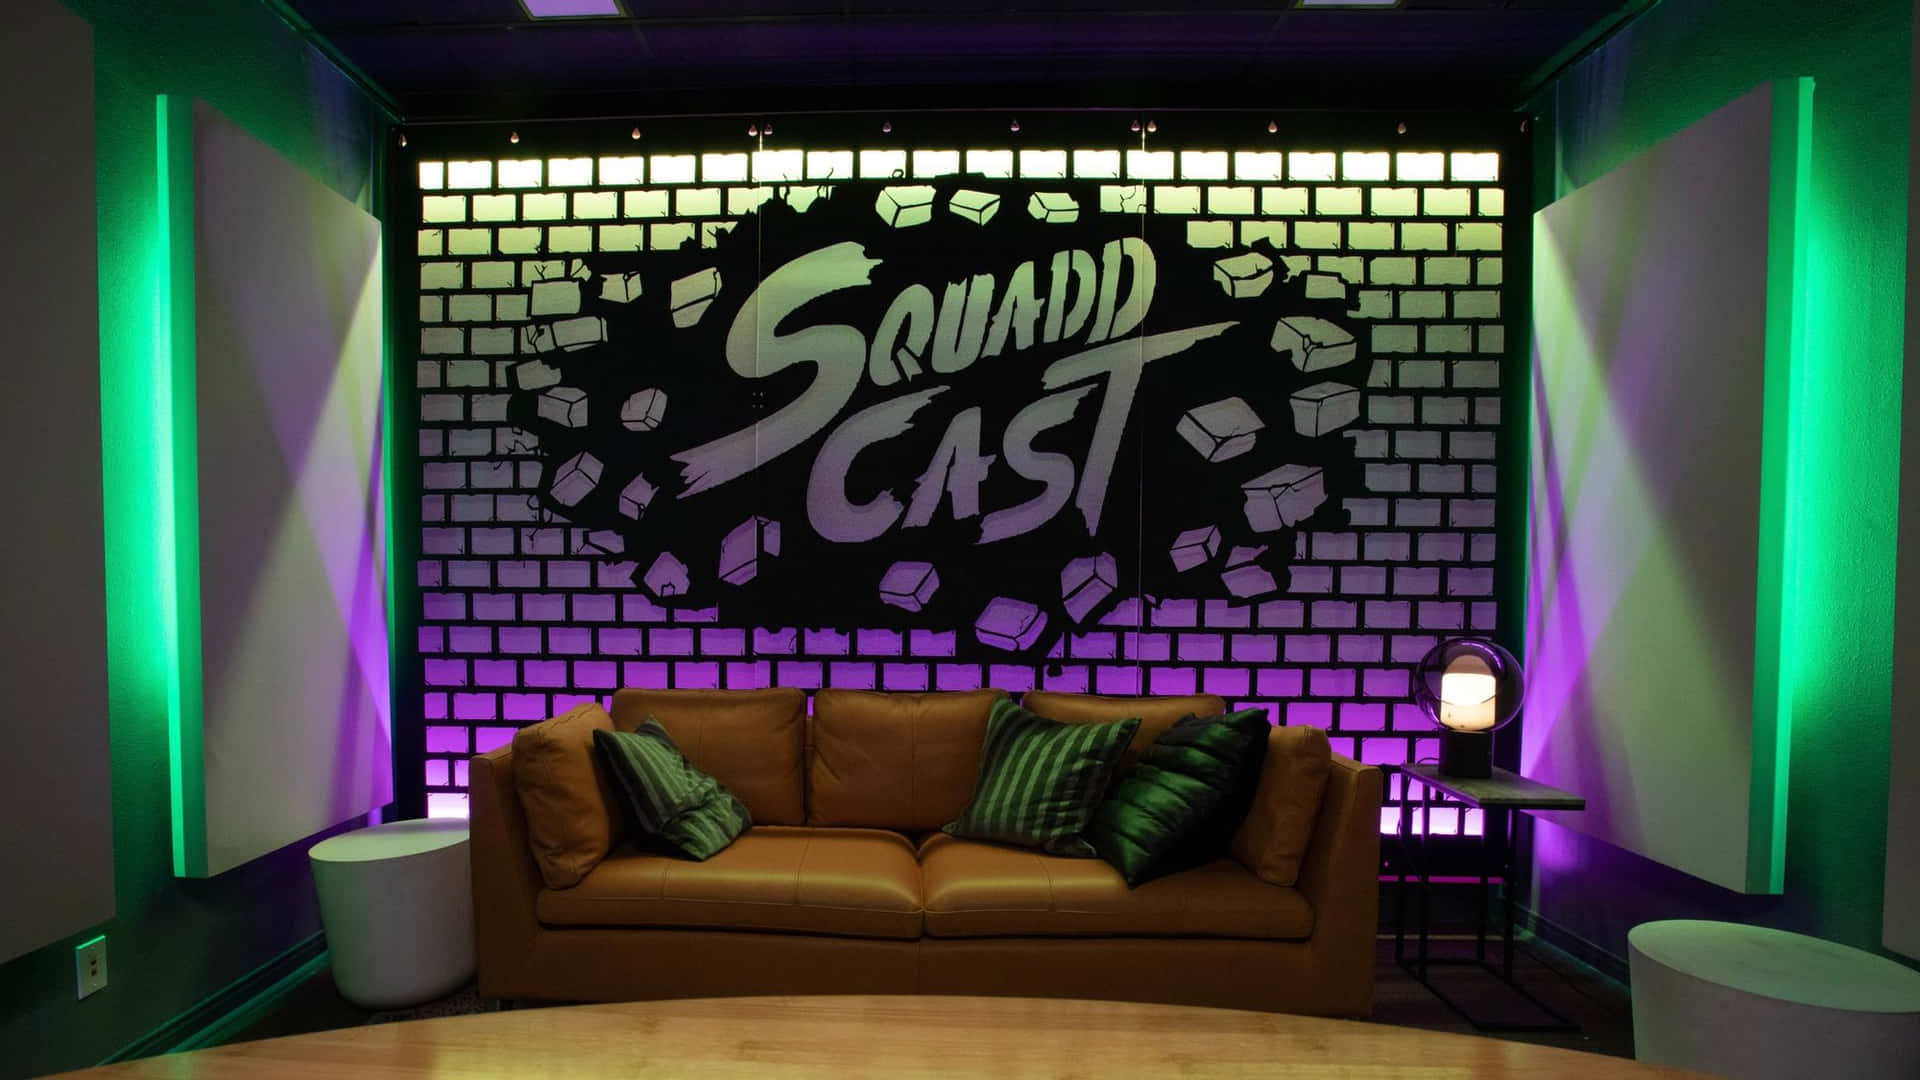 A Room With A Couch And A Wall With The Word Soundcast